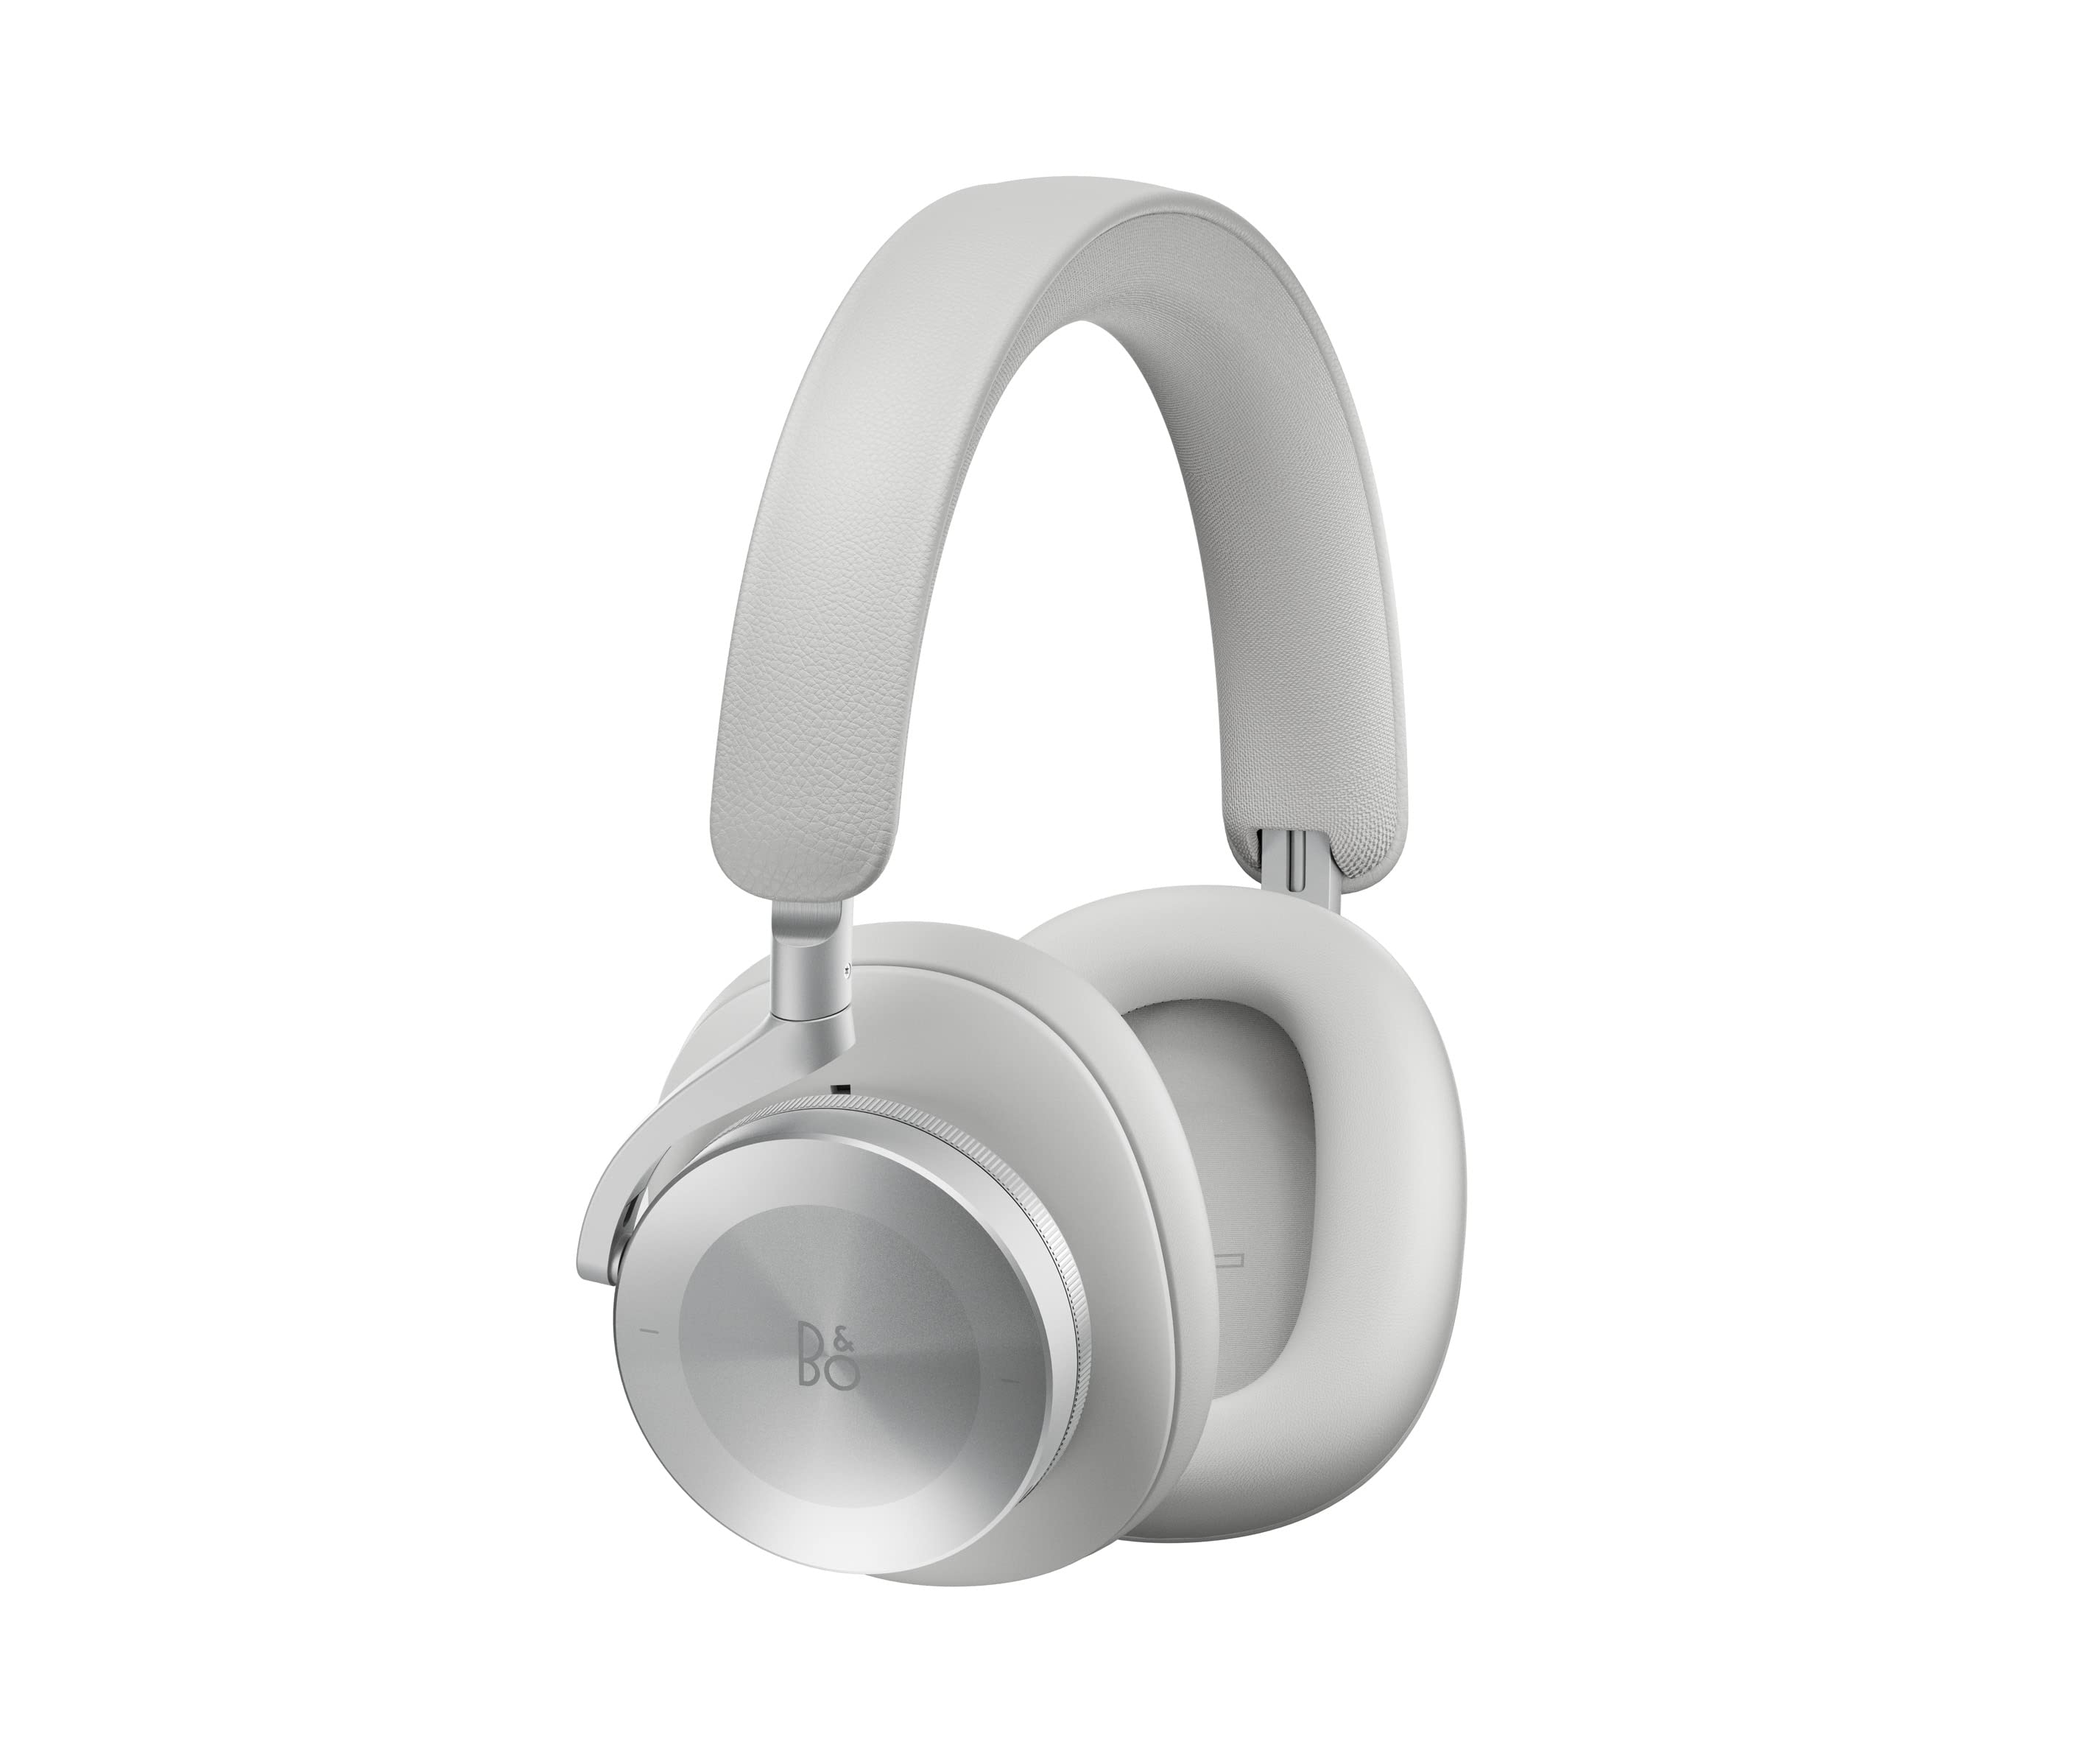 Bang & Olufsen Beoplay H95 Premium Comfortable Wireless (ANC) Over-Ear Headphones with Protective Carrying Case, Grey Mist